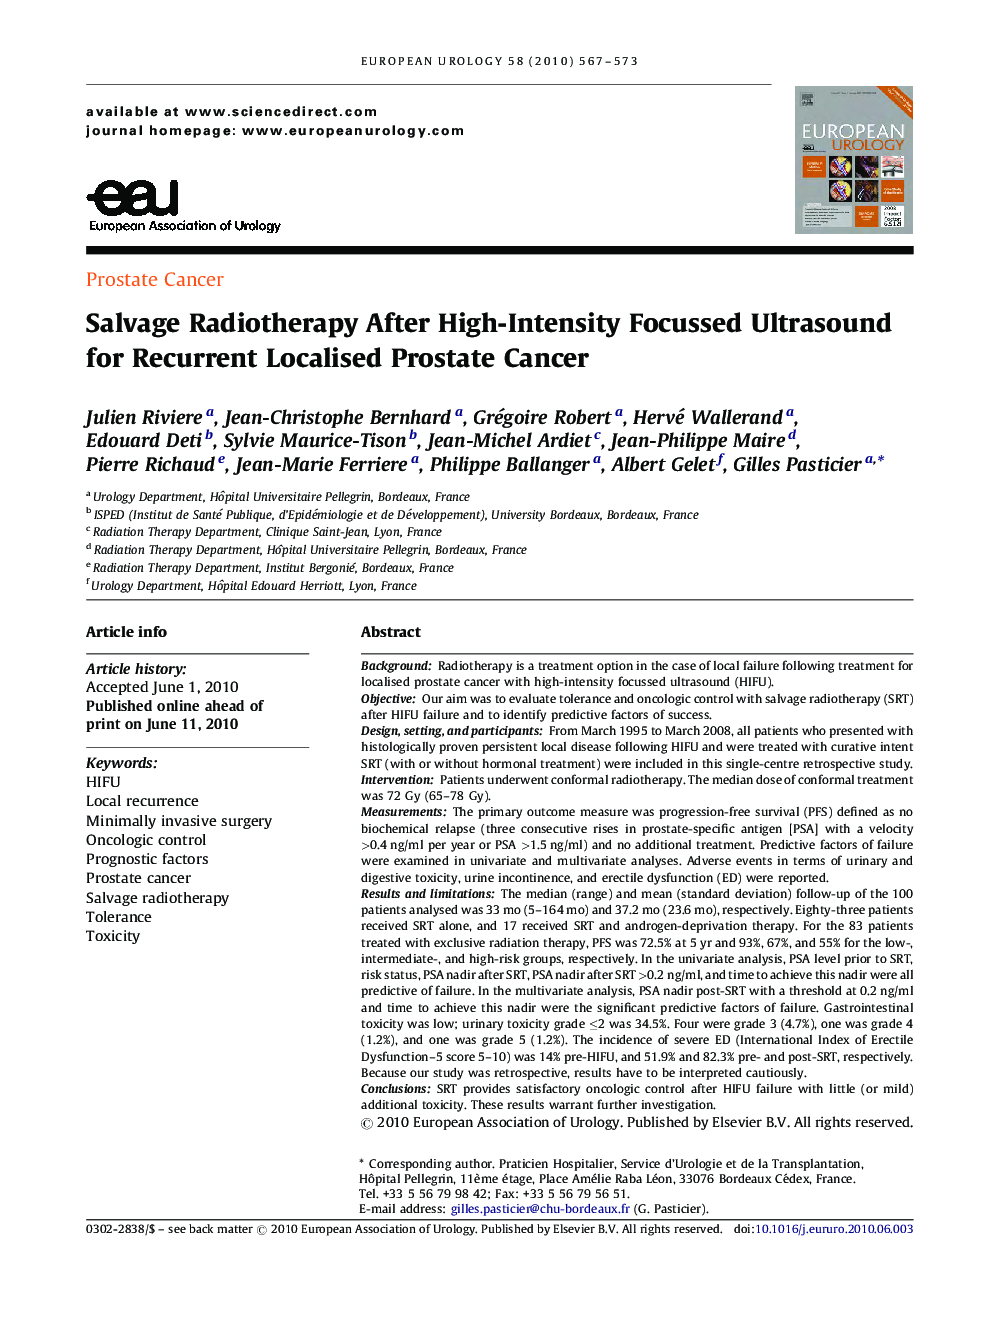 Salvage Radiotherapy After High-Intensity Focussed Ultrasound for Recurrent Localised Prostate Cancer